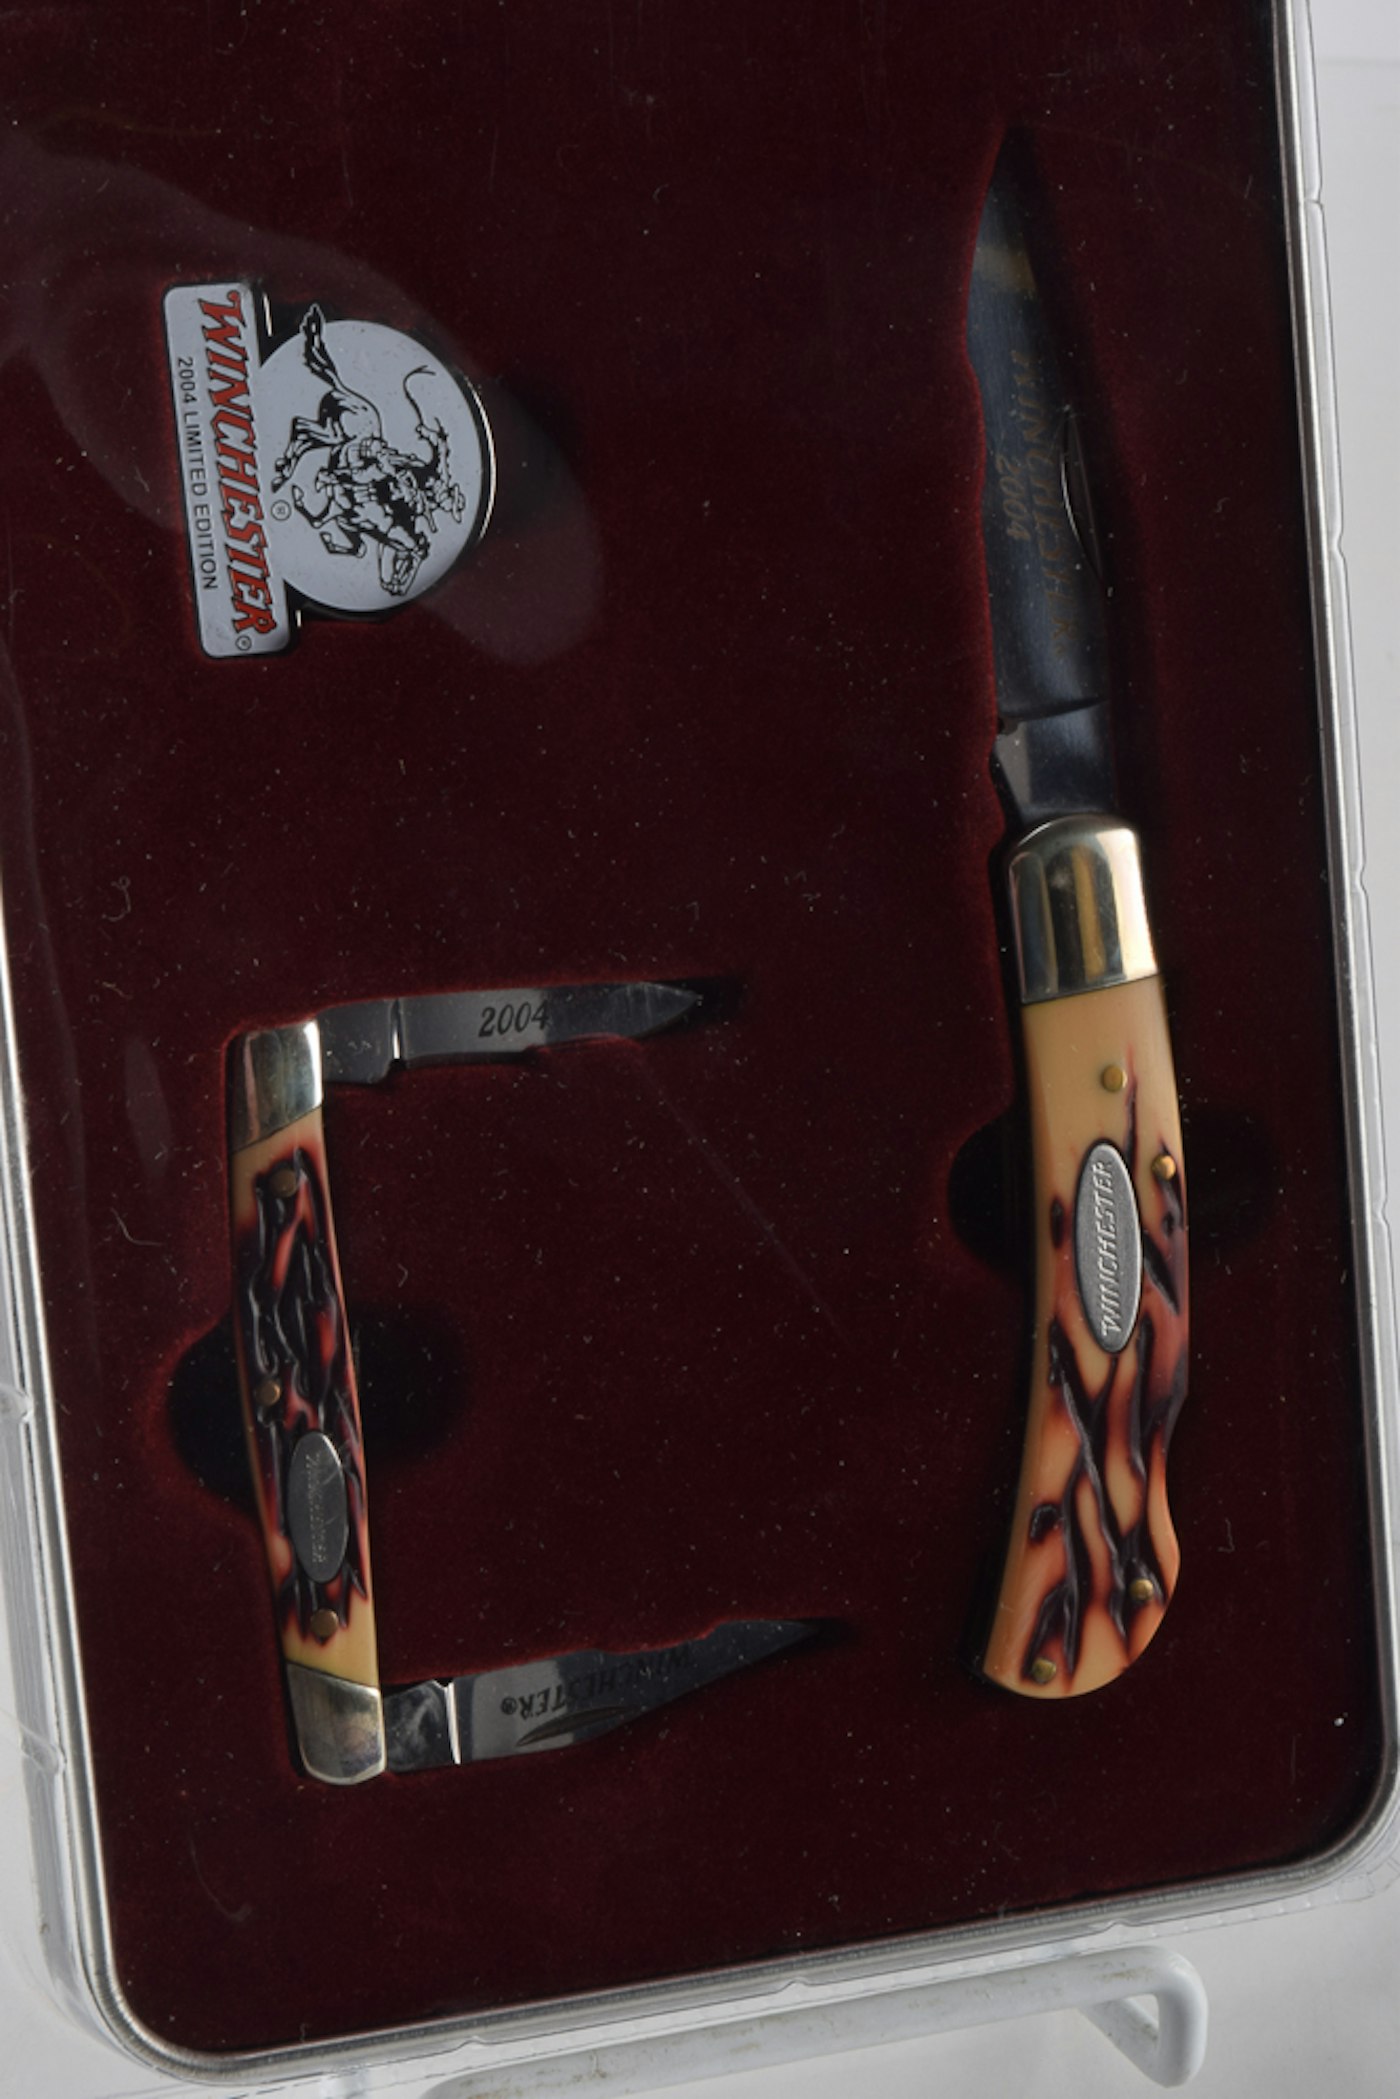 2006 Winchester Limited Edition 3 Knife Set - 3 Pc Winchester Limited Edition 2006 Box Folding Knives ... - They come in a hard case and the hunting knife is complete with a sheath.